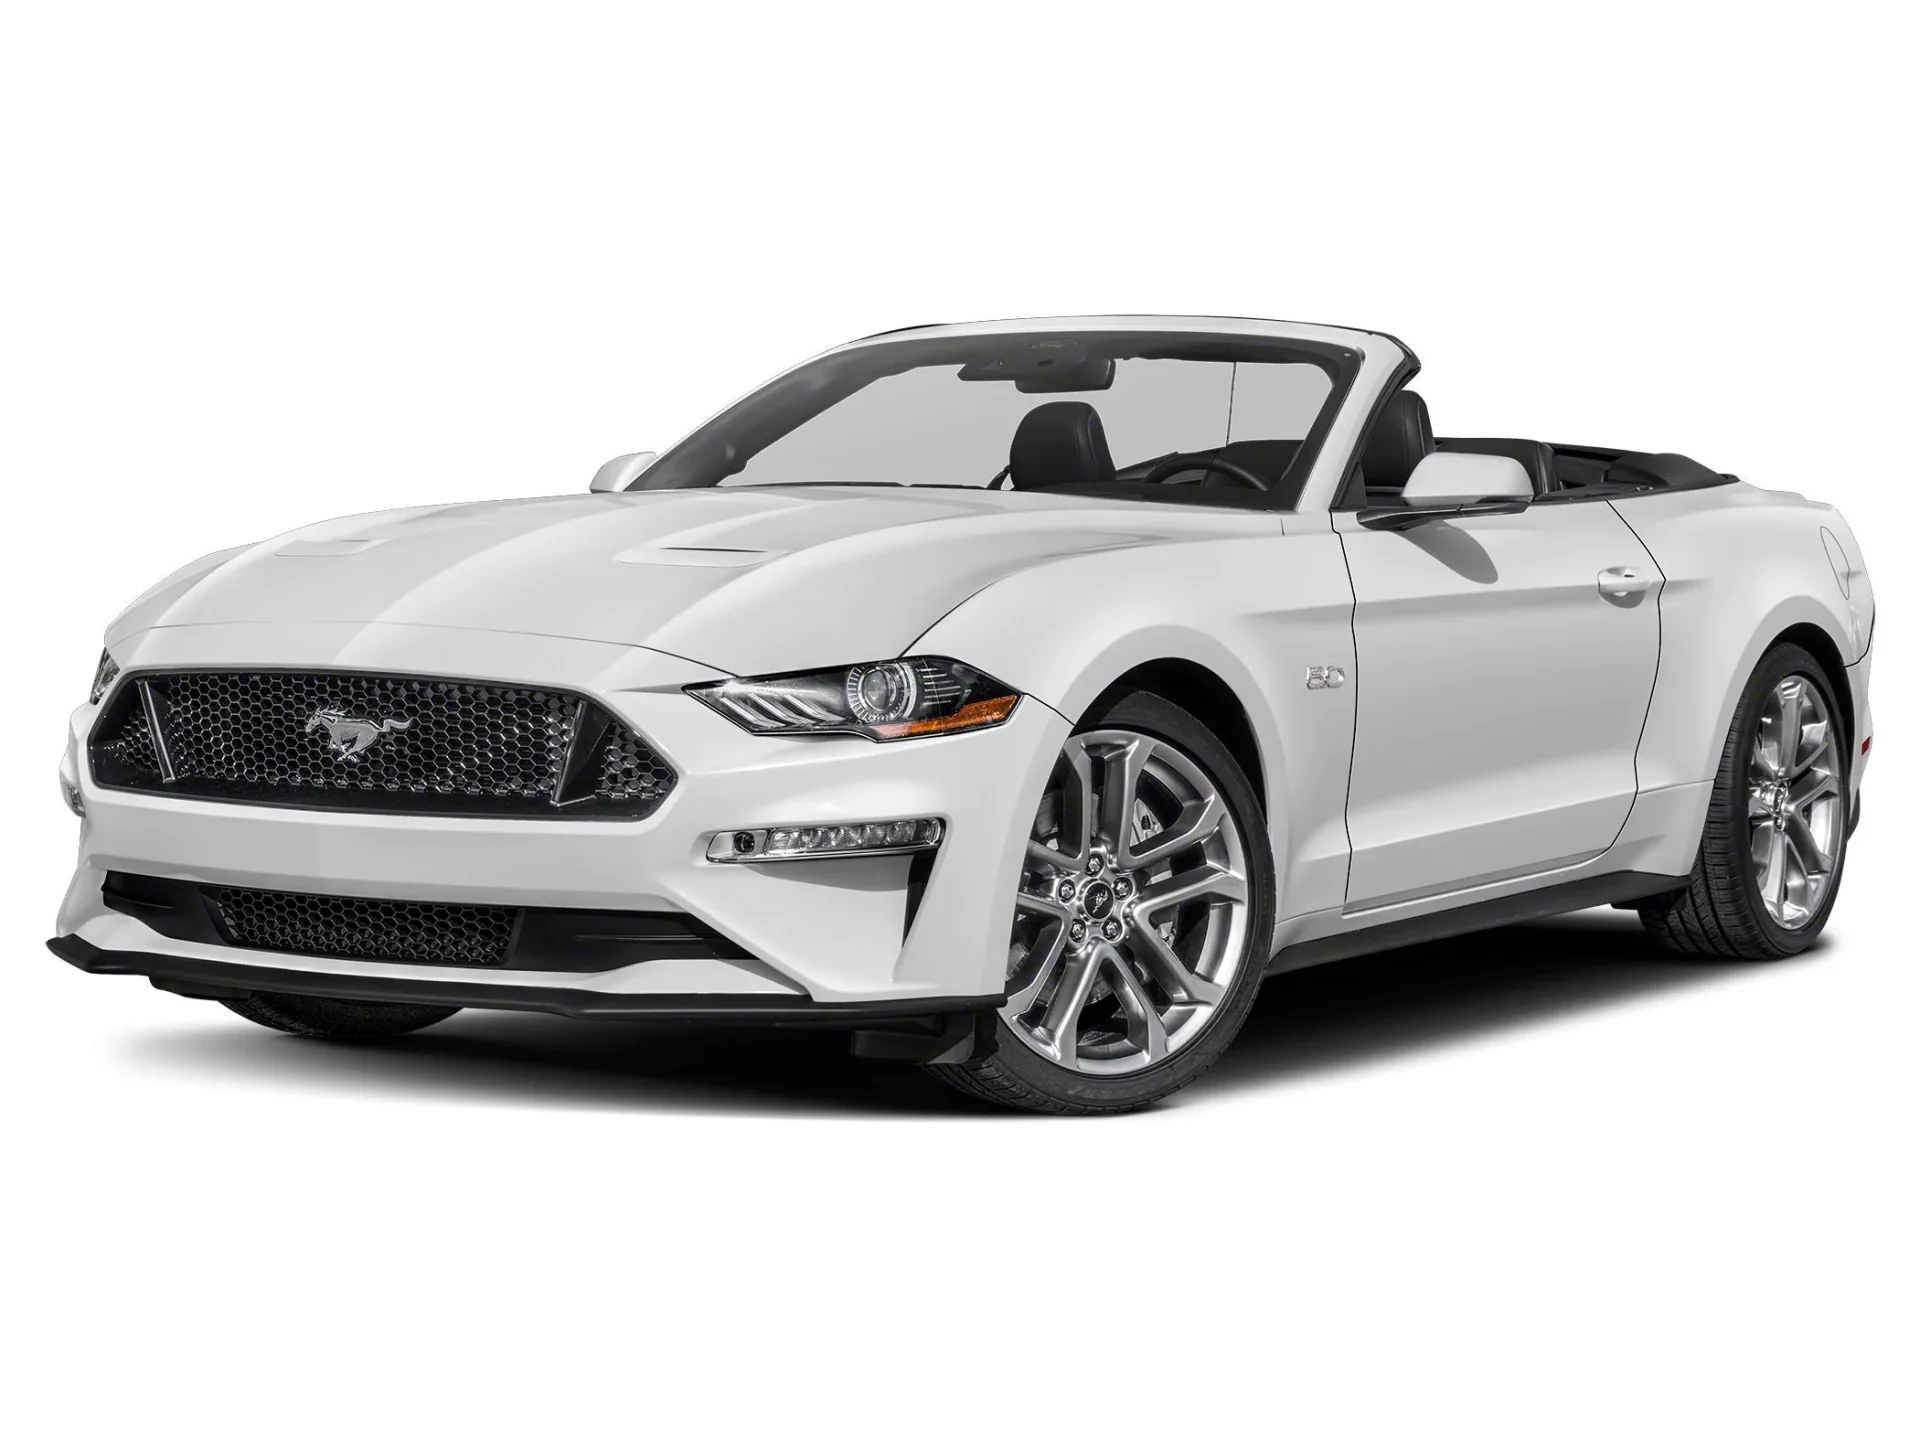 Ford Mustang Convertible image